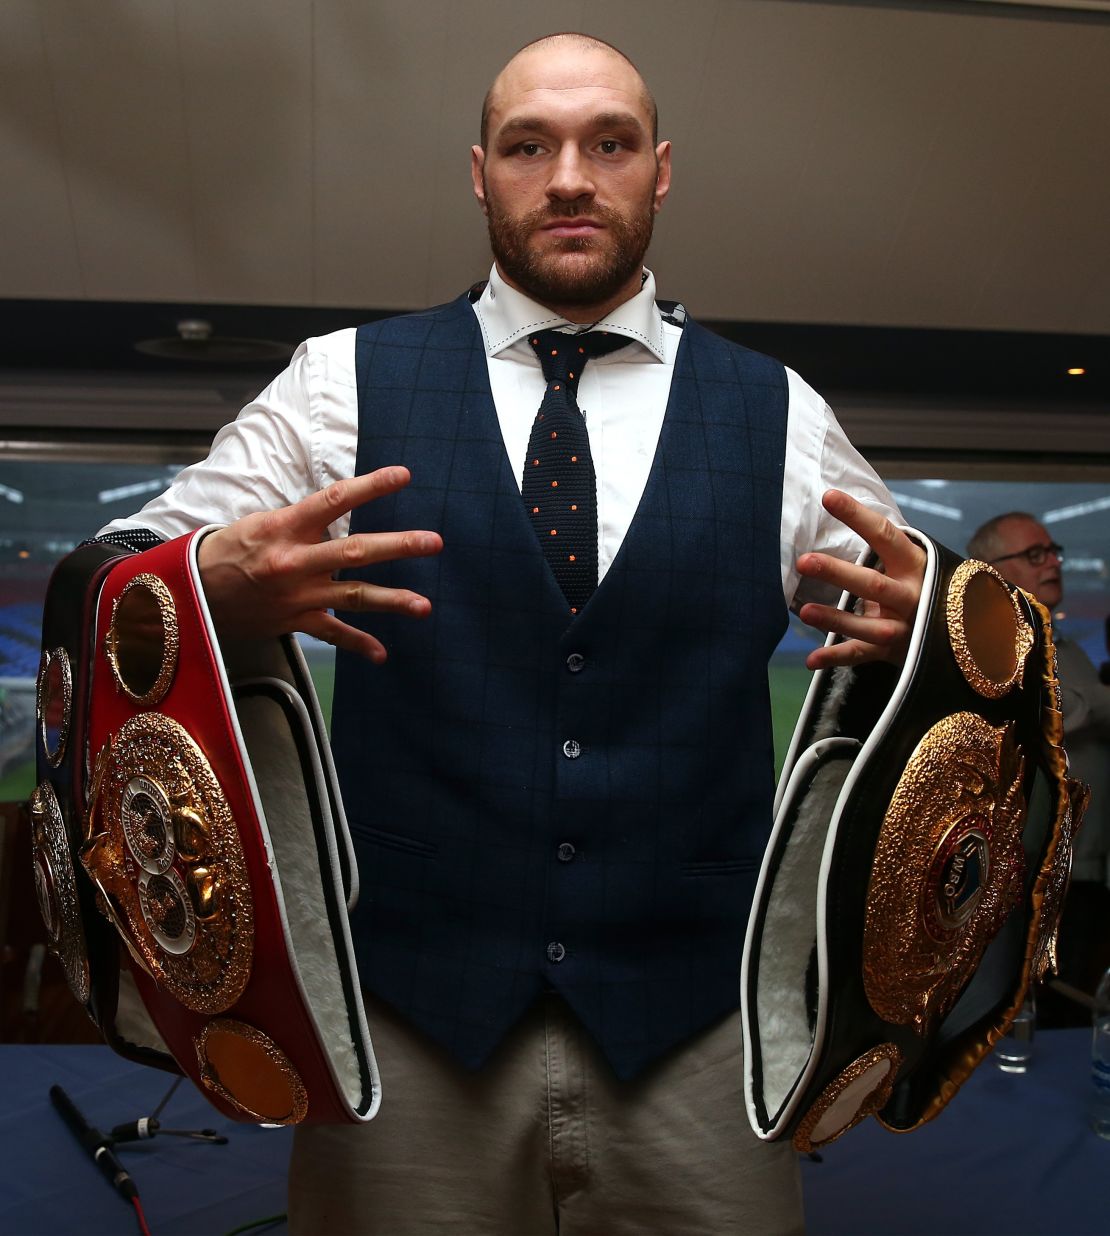 The "Gypsy King" has staged a remarkable comeback from severe mental health issues.